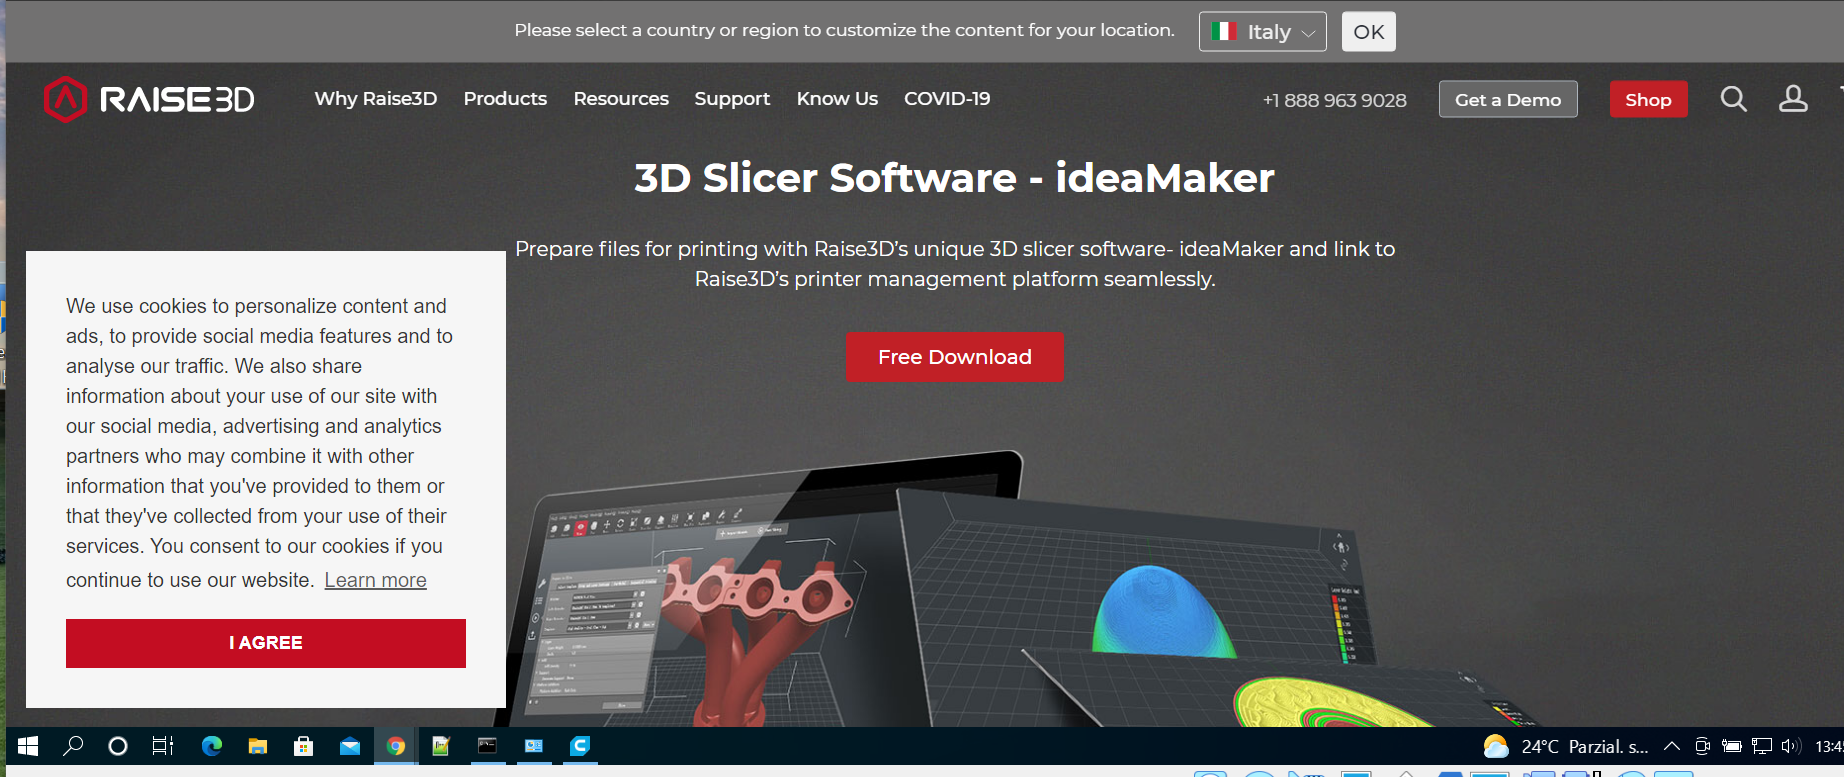 Ideamaker download page